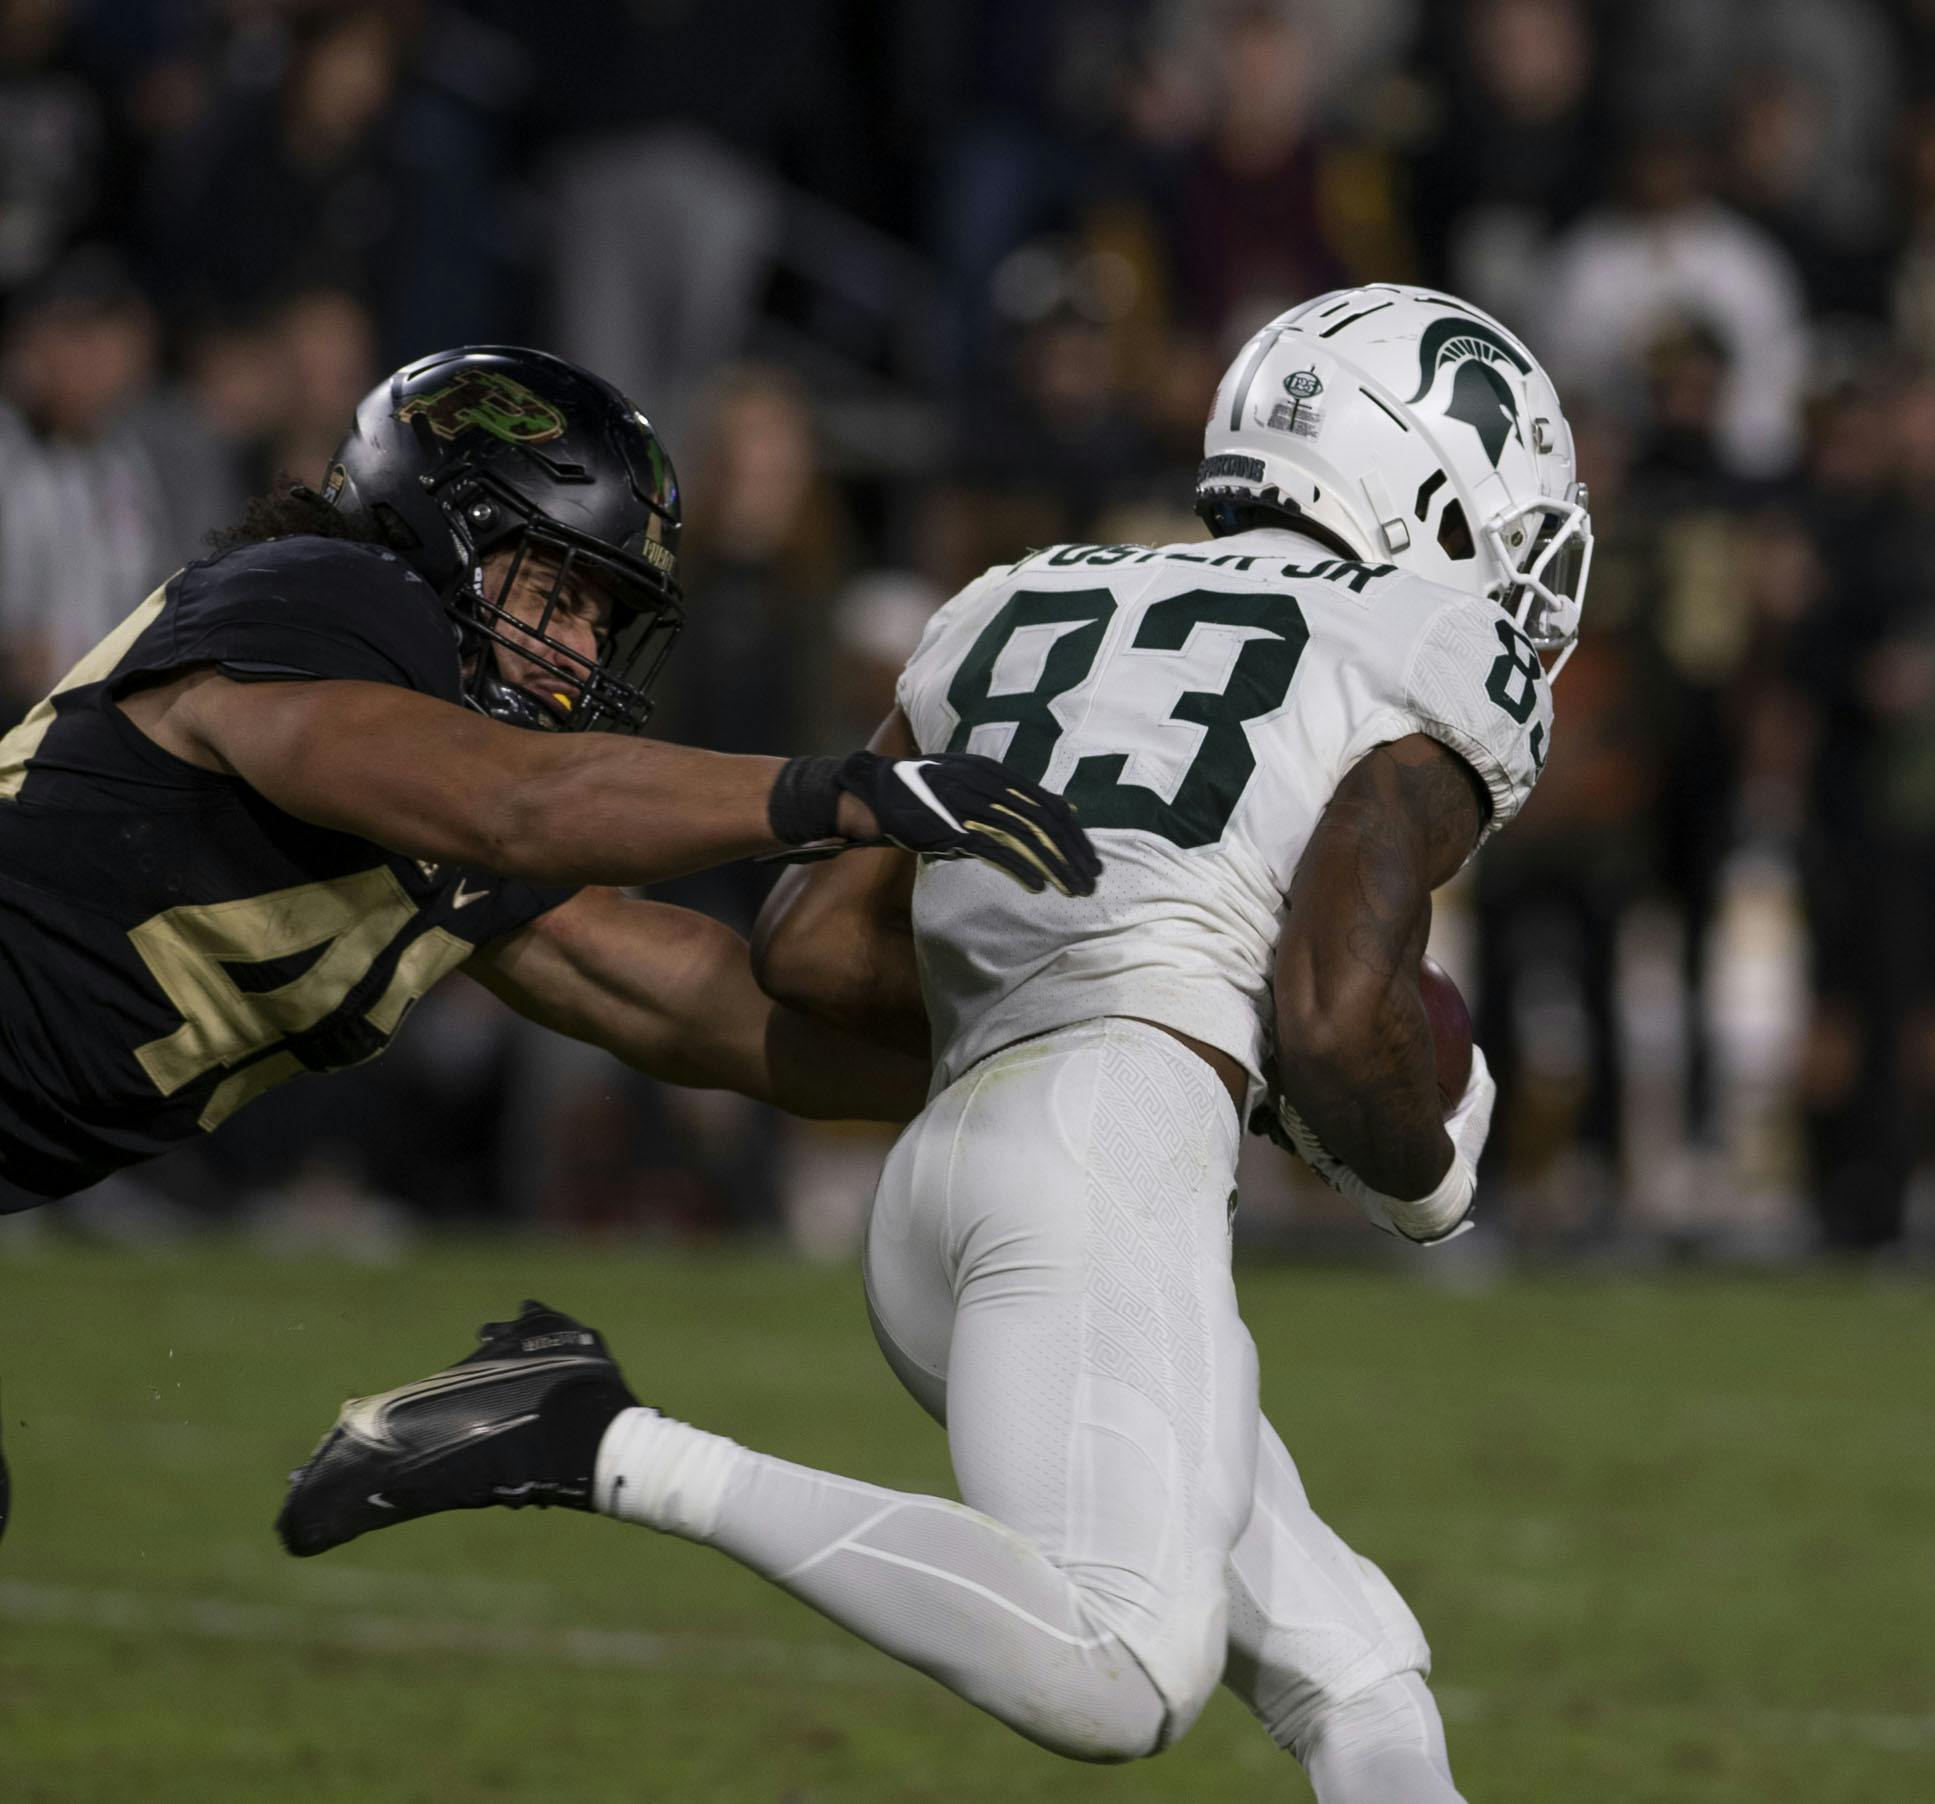 <p>Purdue&#x27;s Kieren Douglas (43) catches up to Spartan sophomore wide receiver Montorie Foster (83) in the MSU&#x27;s match against the Boilermakers at Ross-Ade Stadium in West Lafayette on Saturday, Nov. 6, 2021.</p>